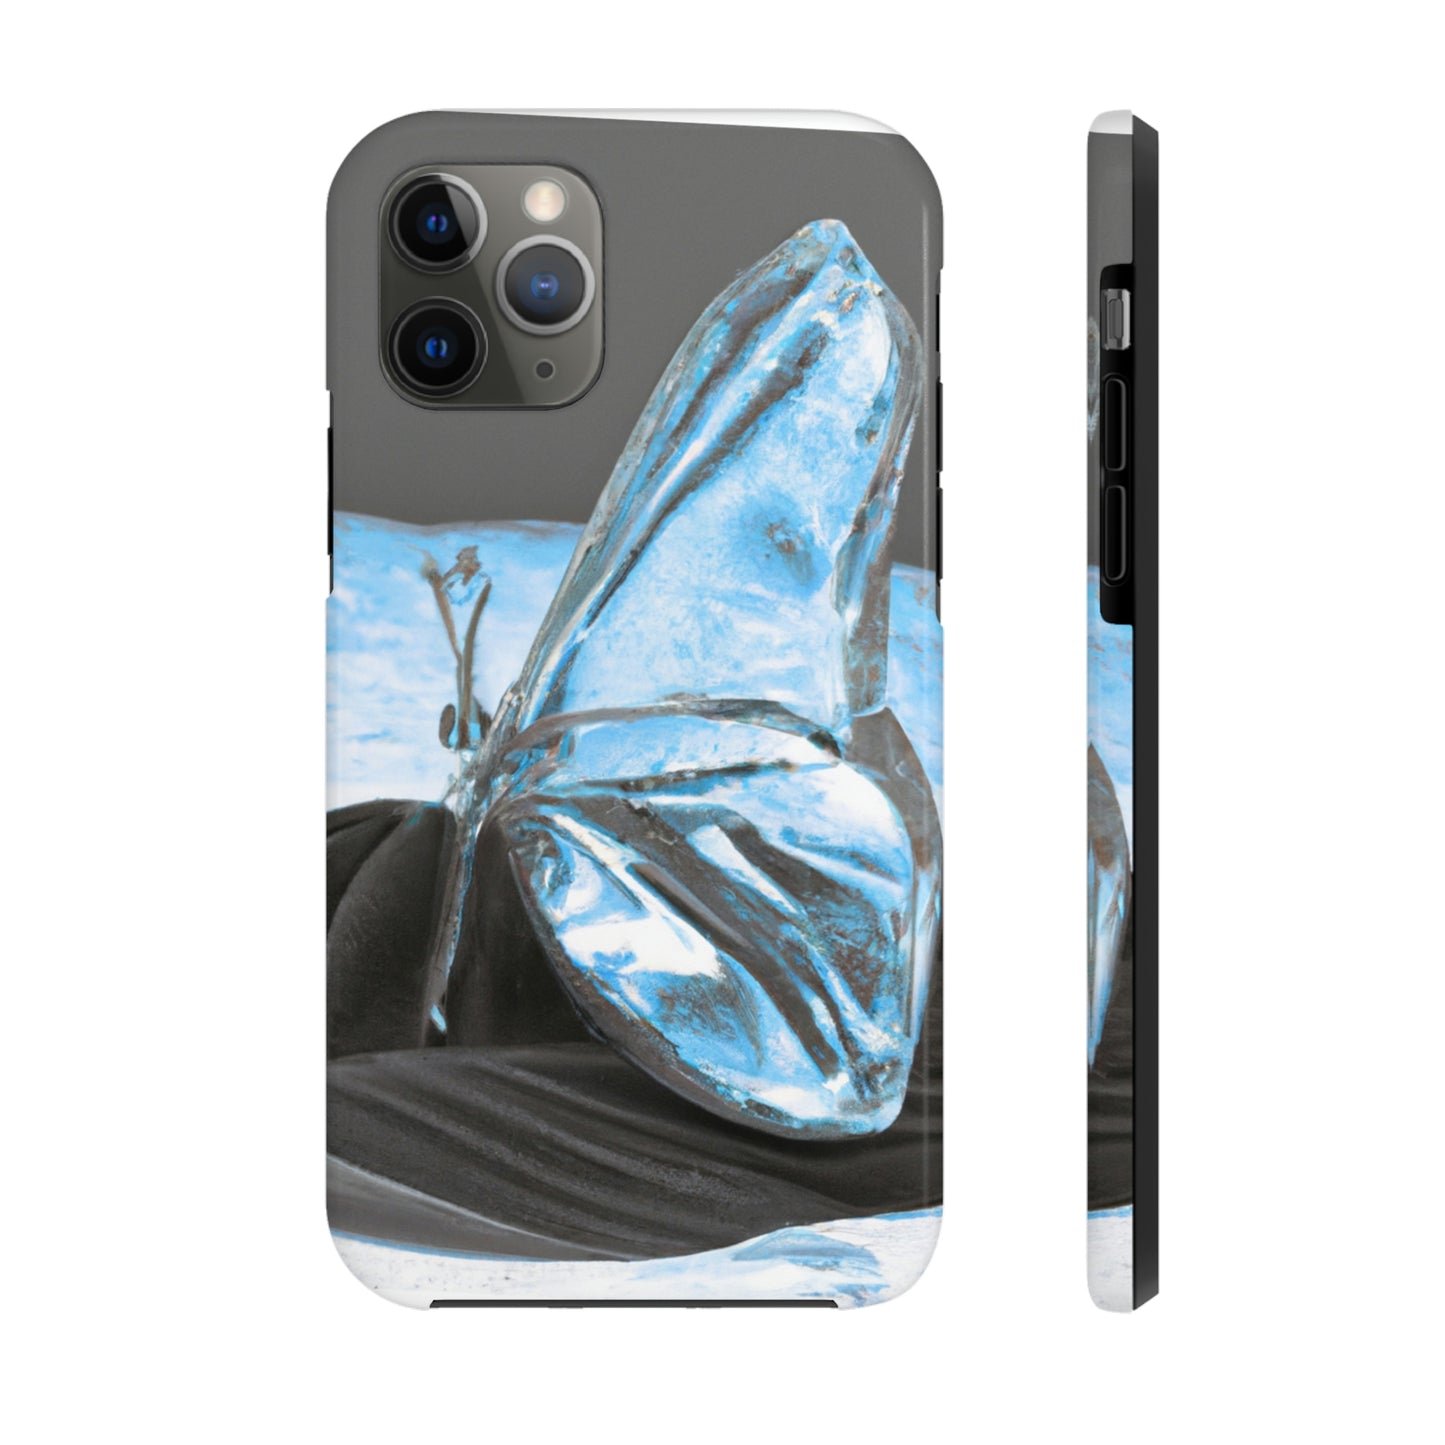 "Wishing for the Sky: A Crystal Butterfly's Dream" - The Alien Tough Phone Cases